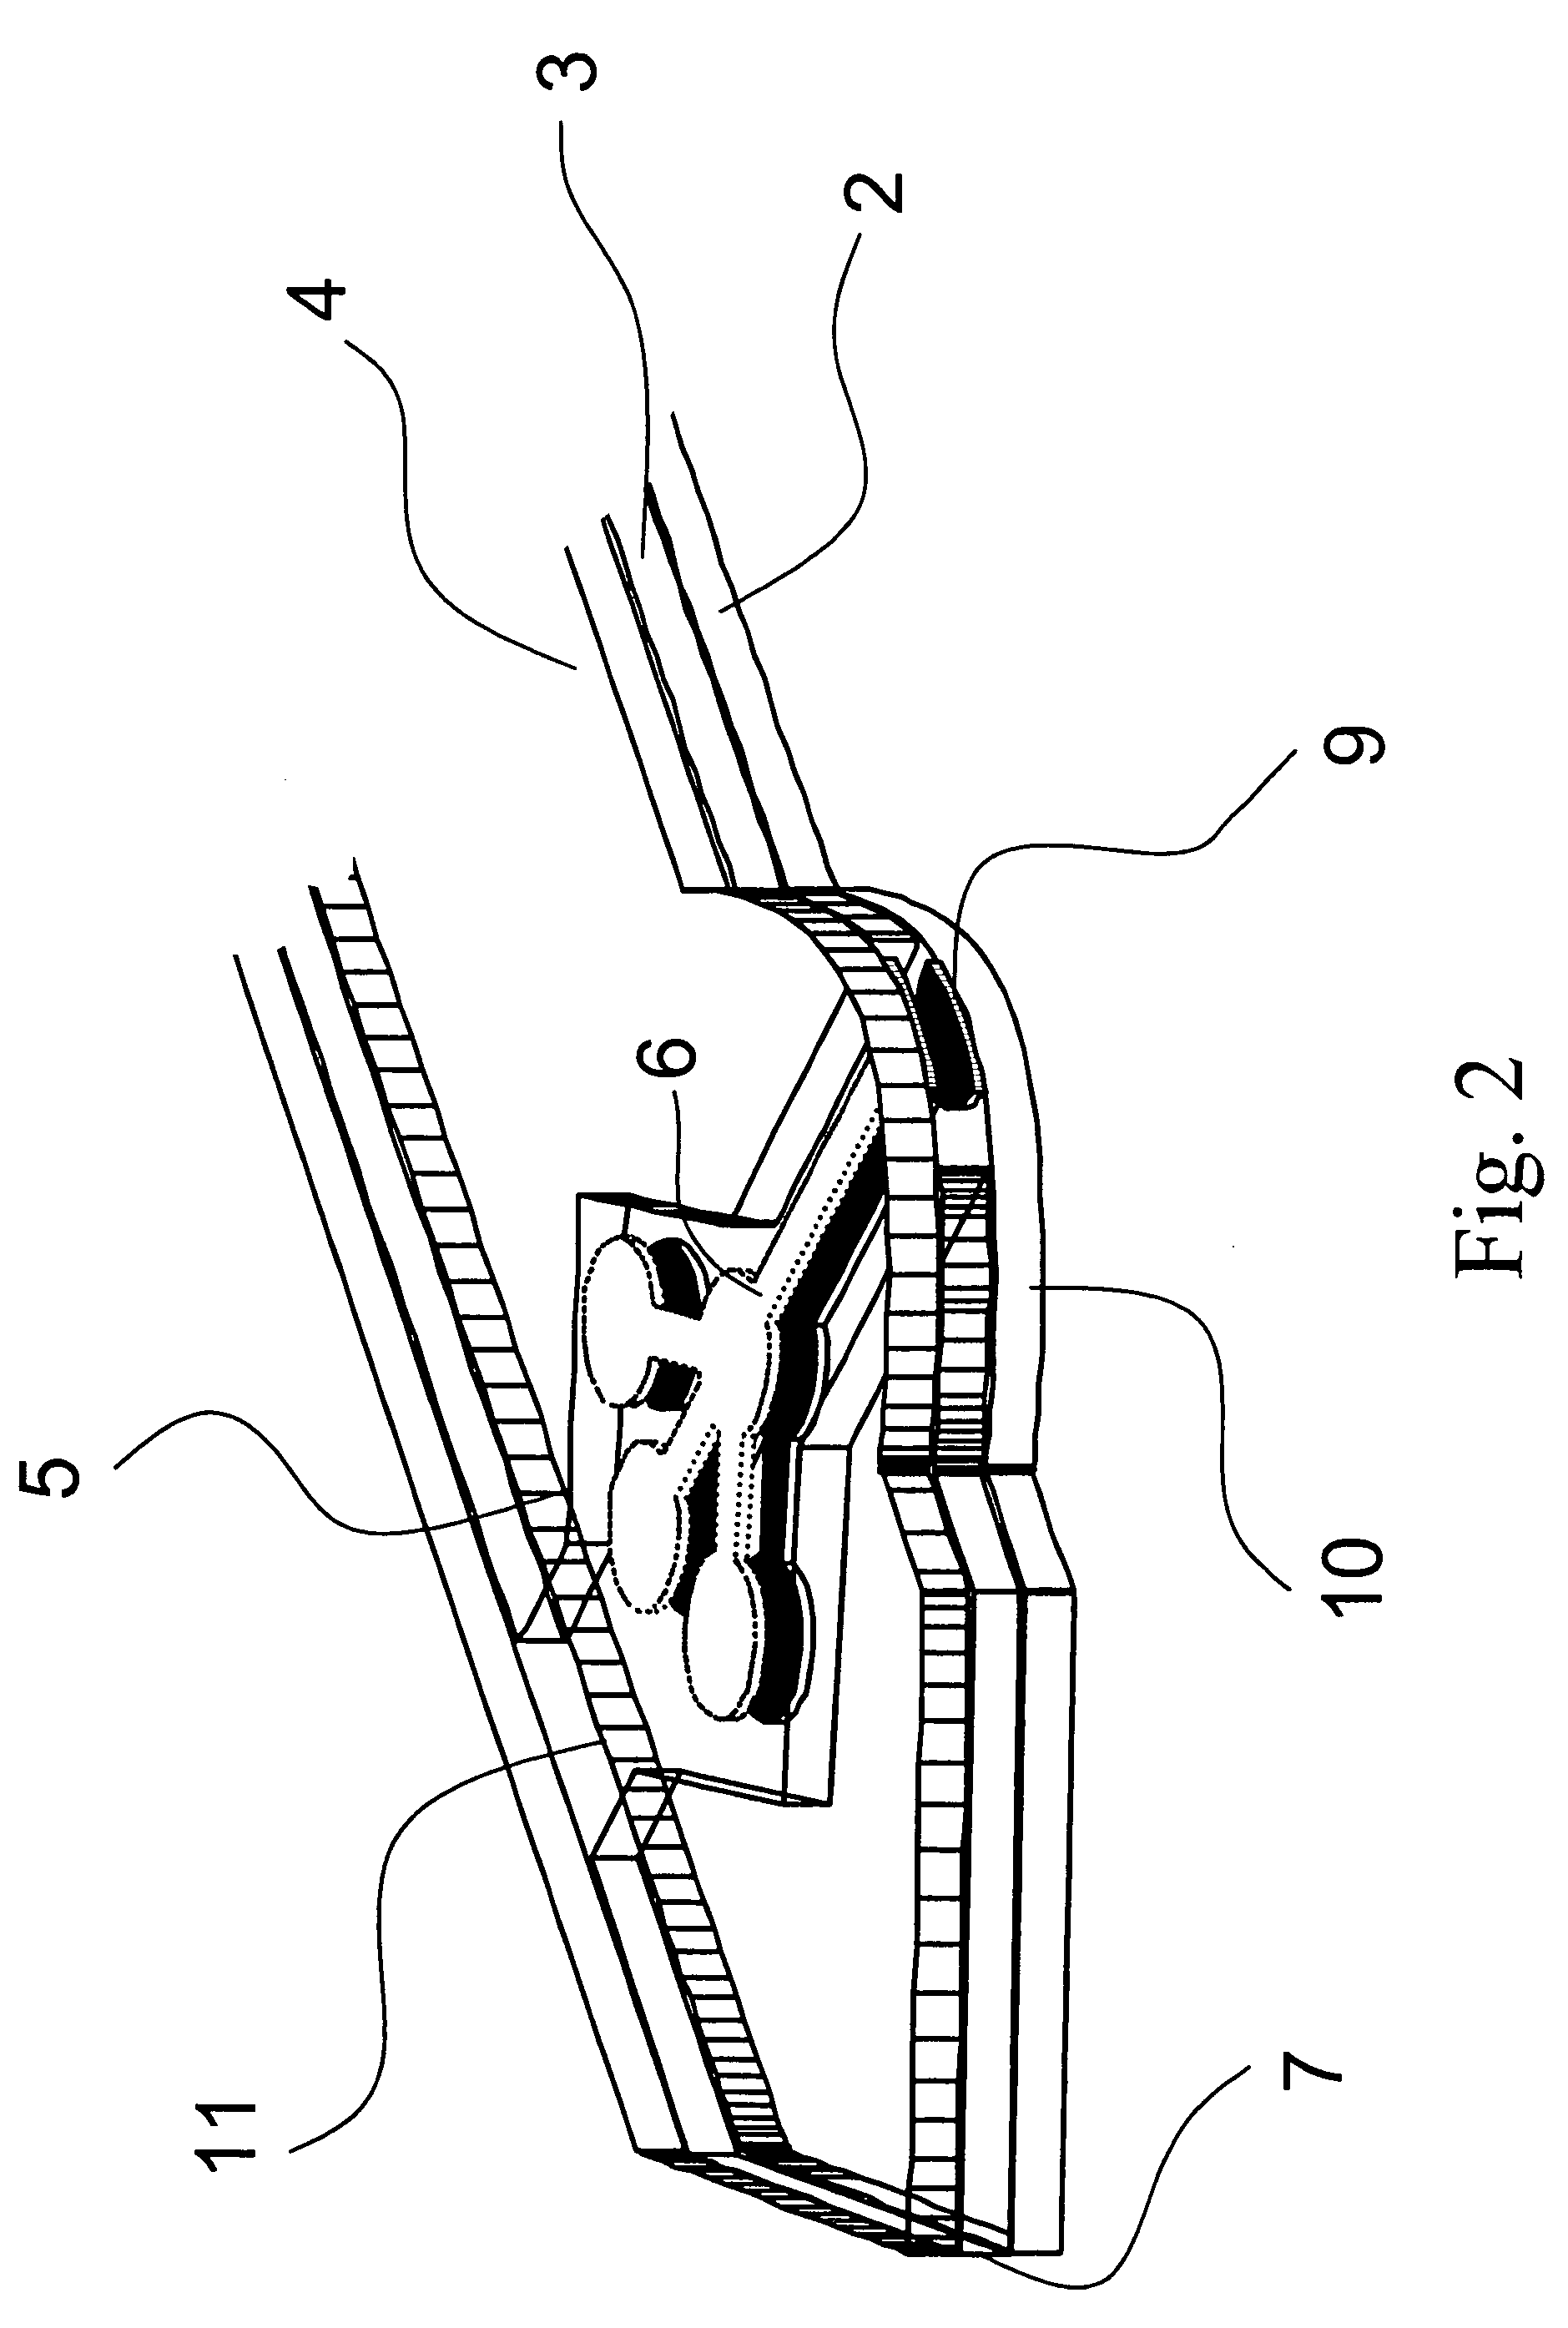 Analyte test system for determining the concentration of an analyte in a physiological or aqueous fluid